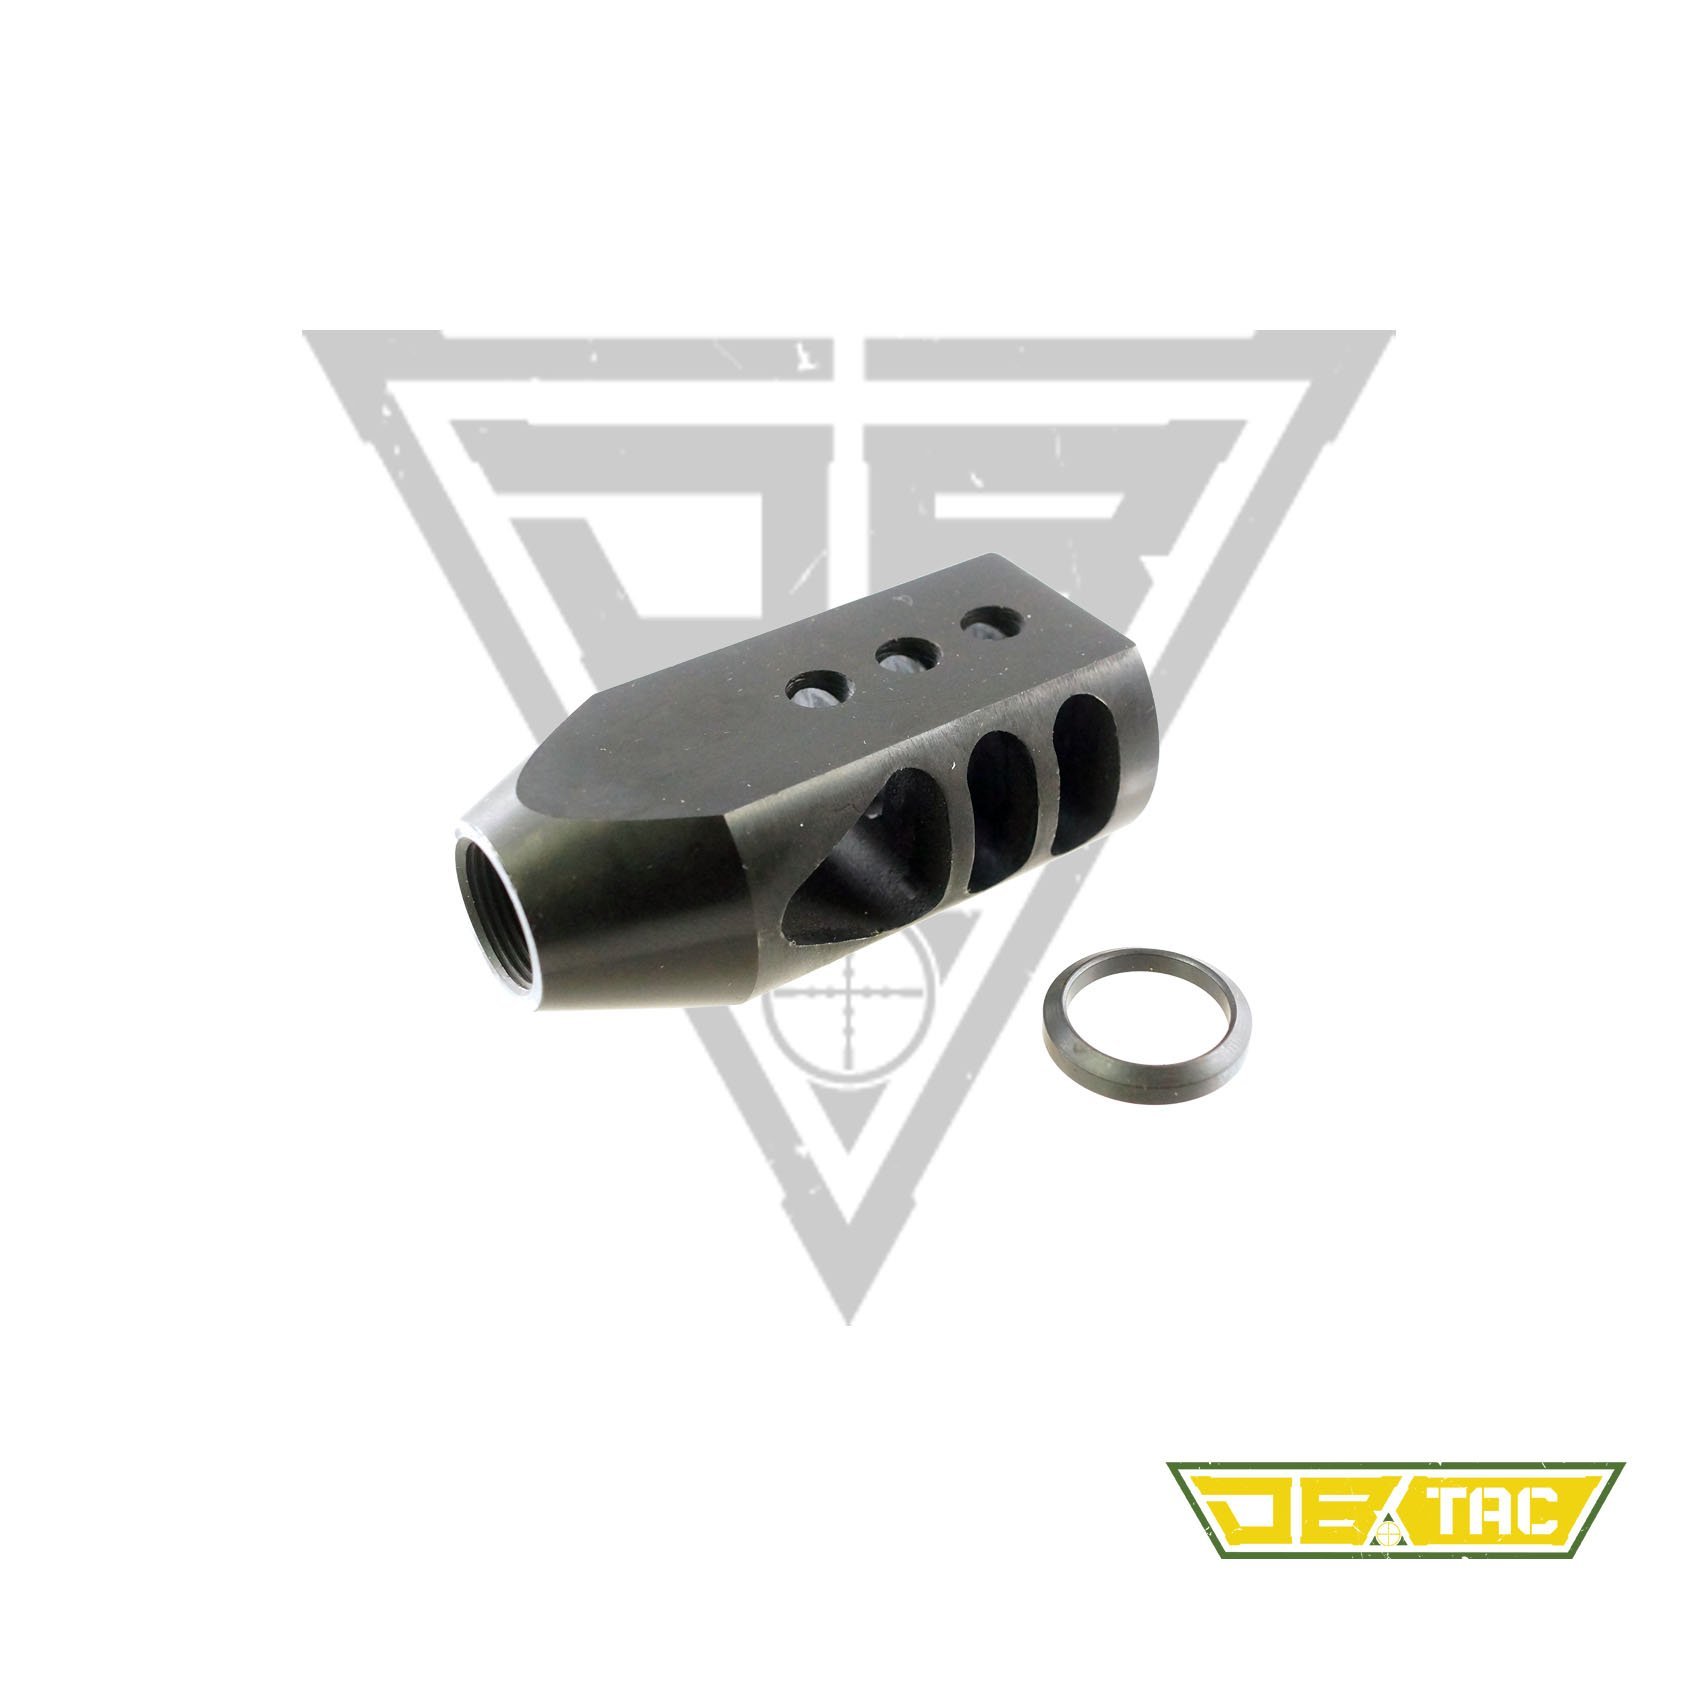 US SELLER!! Steel 458 Tanker Style Competition Muzzle Brake 5/8x32 Thread 